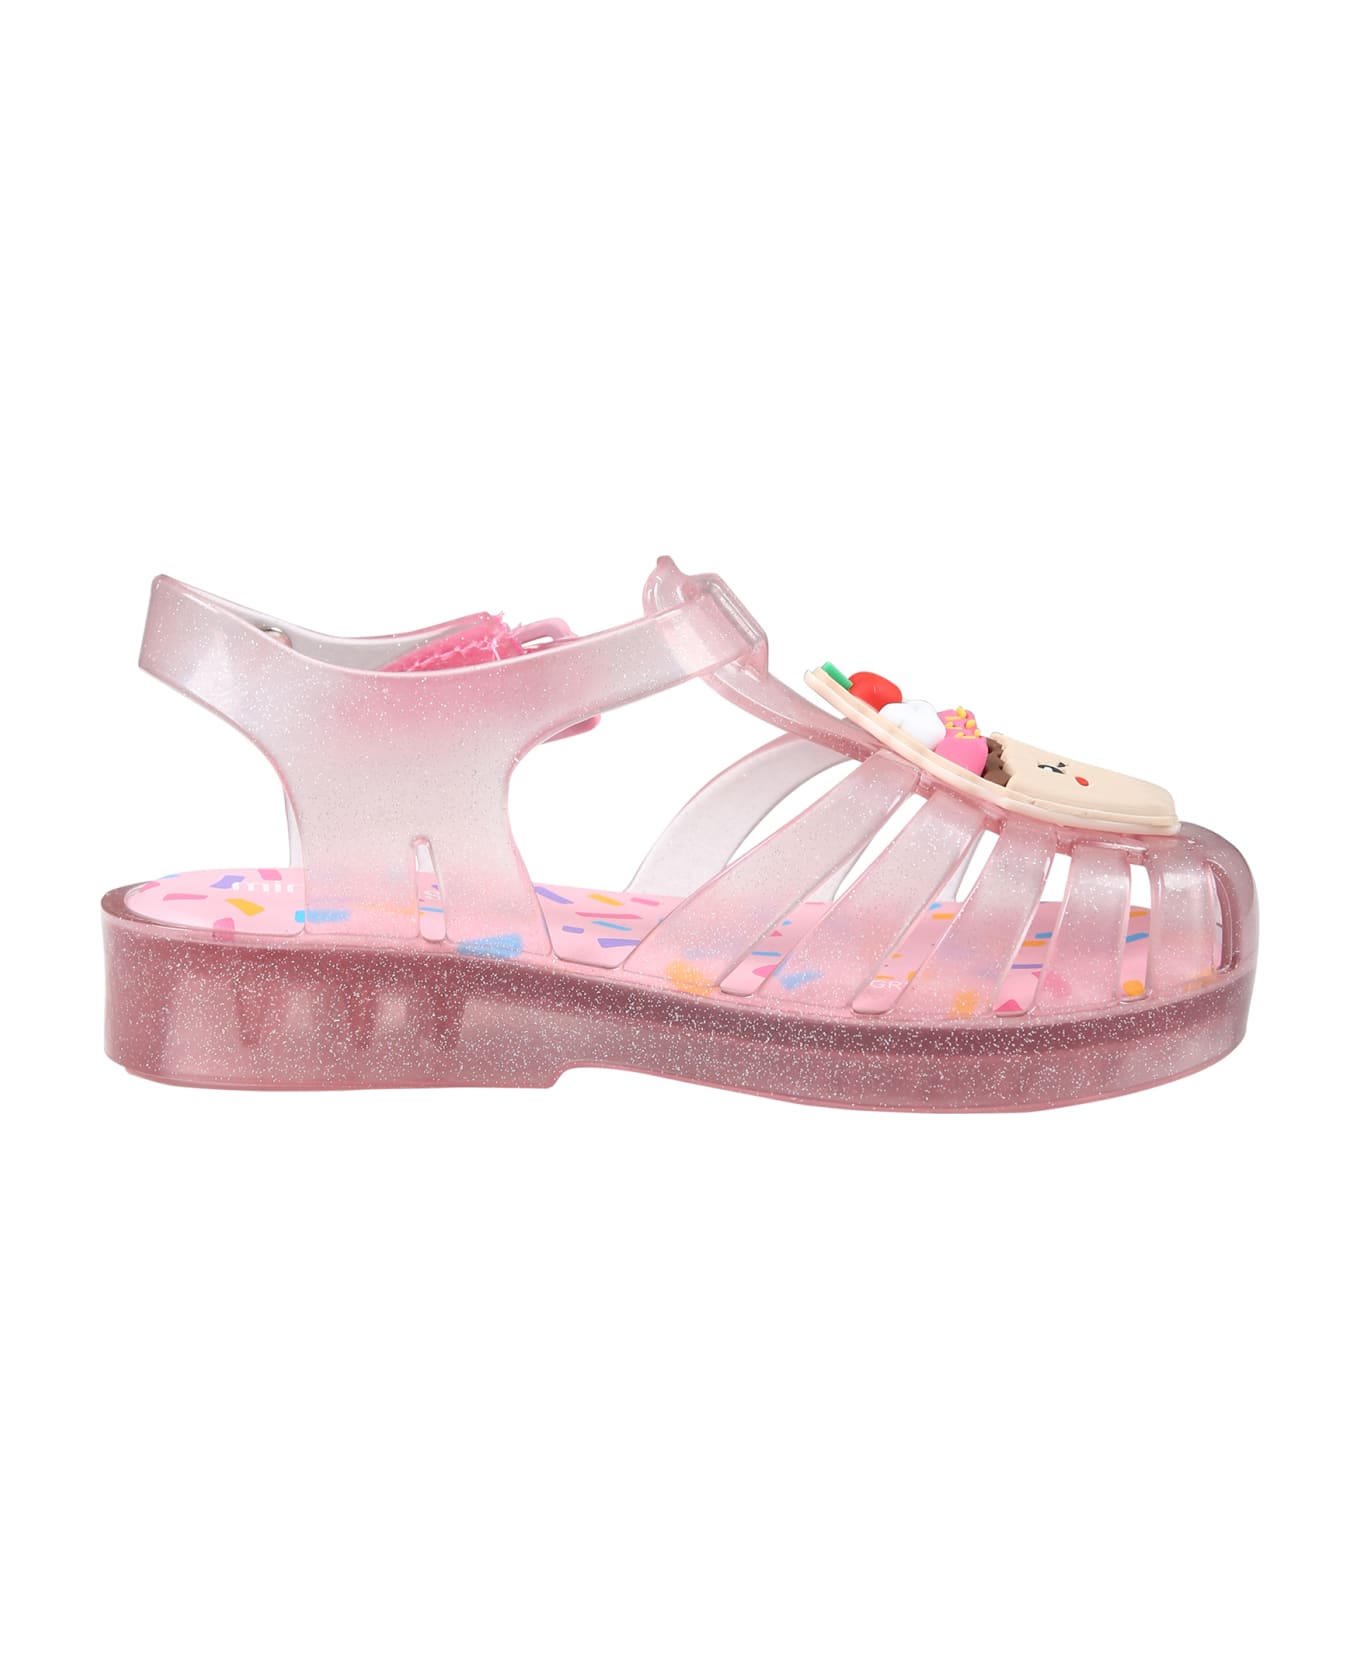 Melissa Pink Sandals For Girl With Cupcake - Pink シューズ